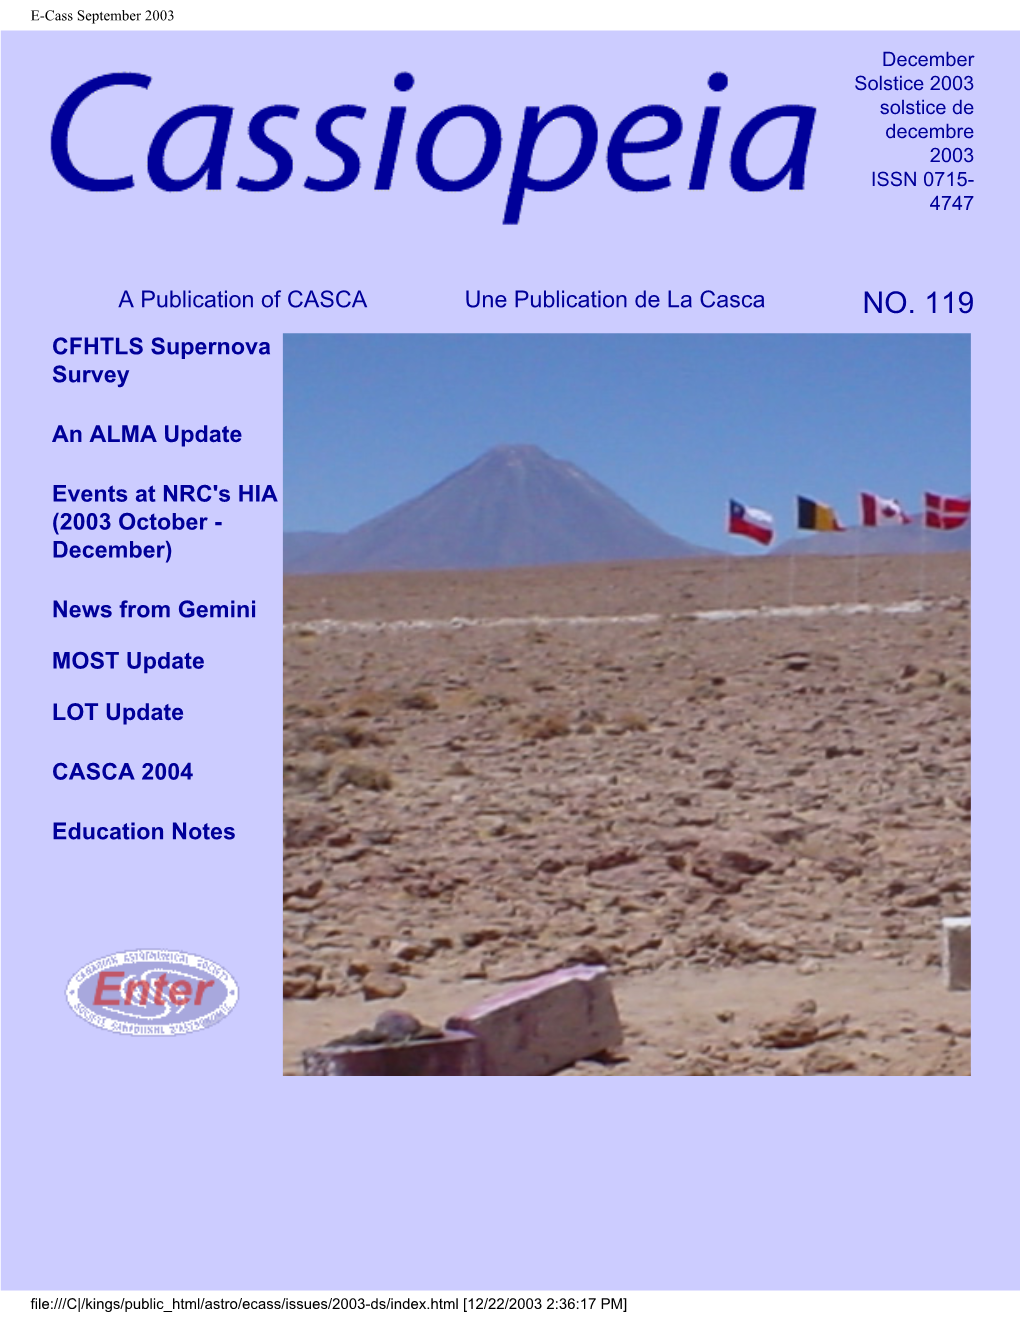 Get PDF Version of This Issue Go to Past Issues of E-Cassiopeia